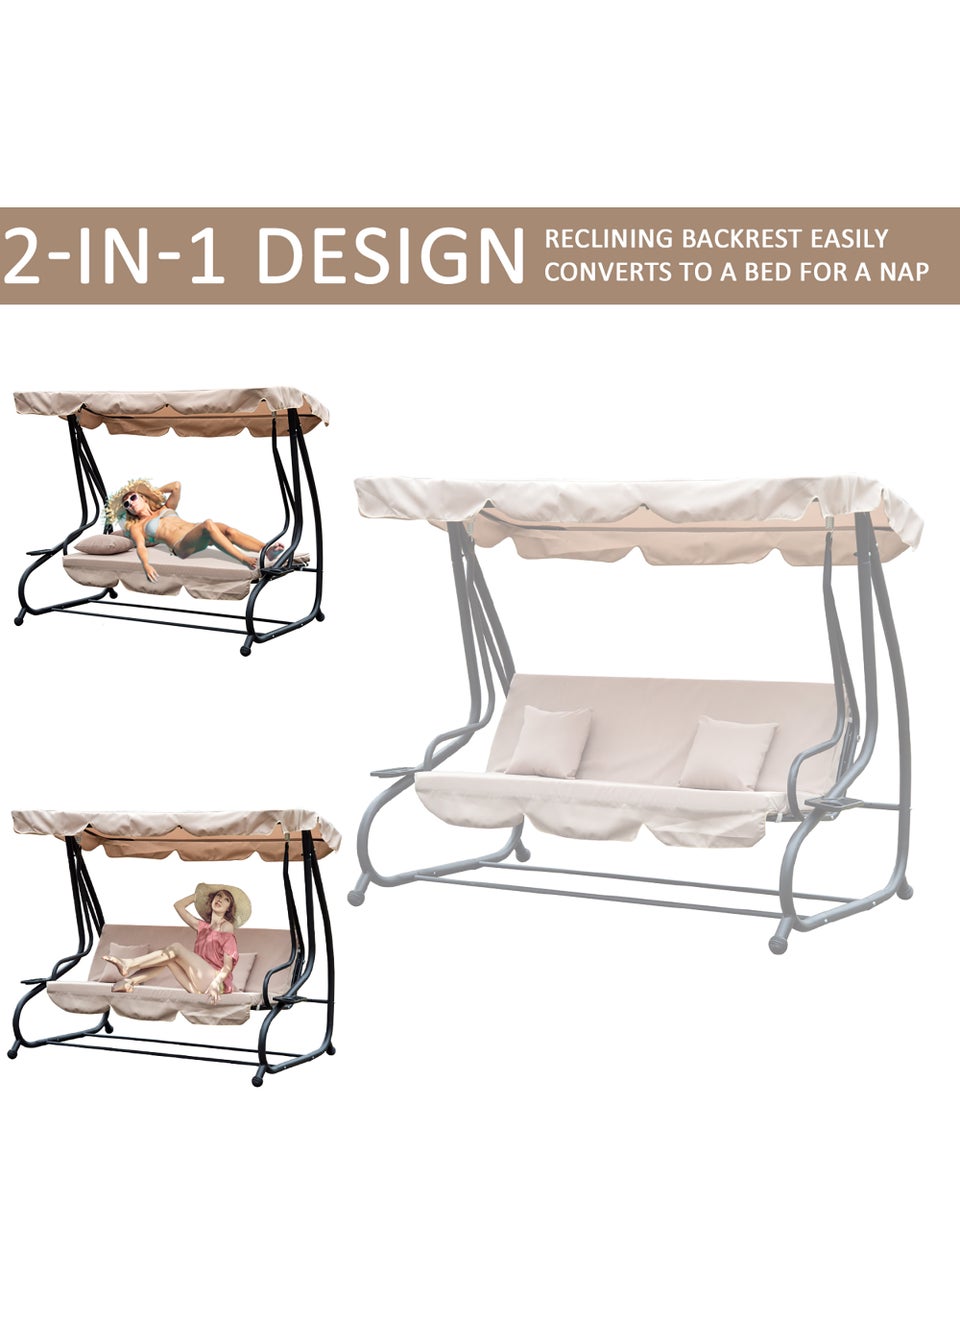 Outsunny 3 Seater Garden Swing Seat Bed Convertible 2-in-1 Hammock Bed